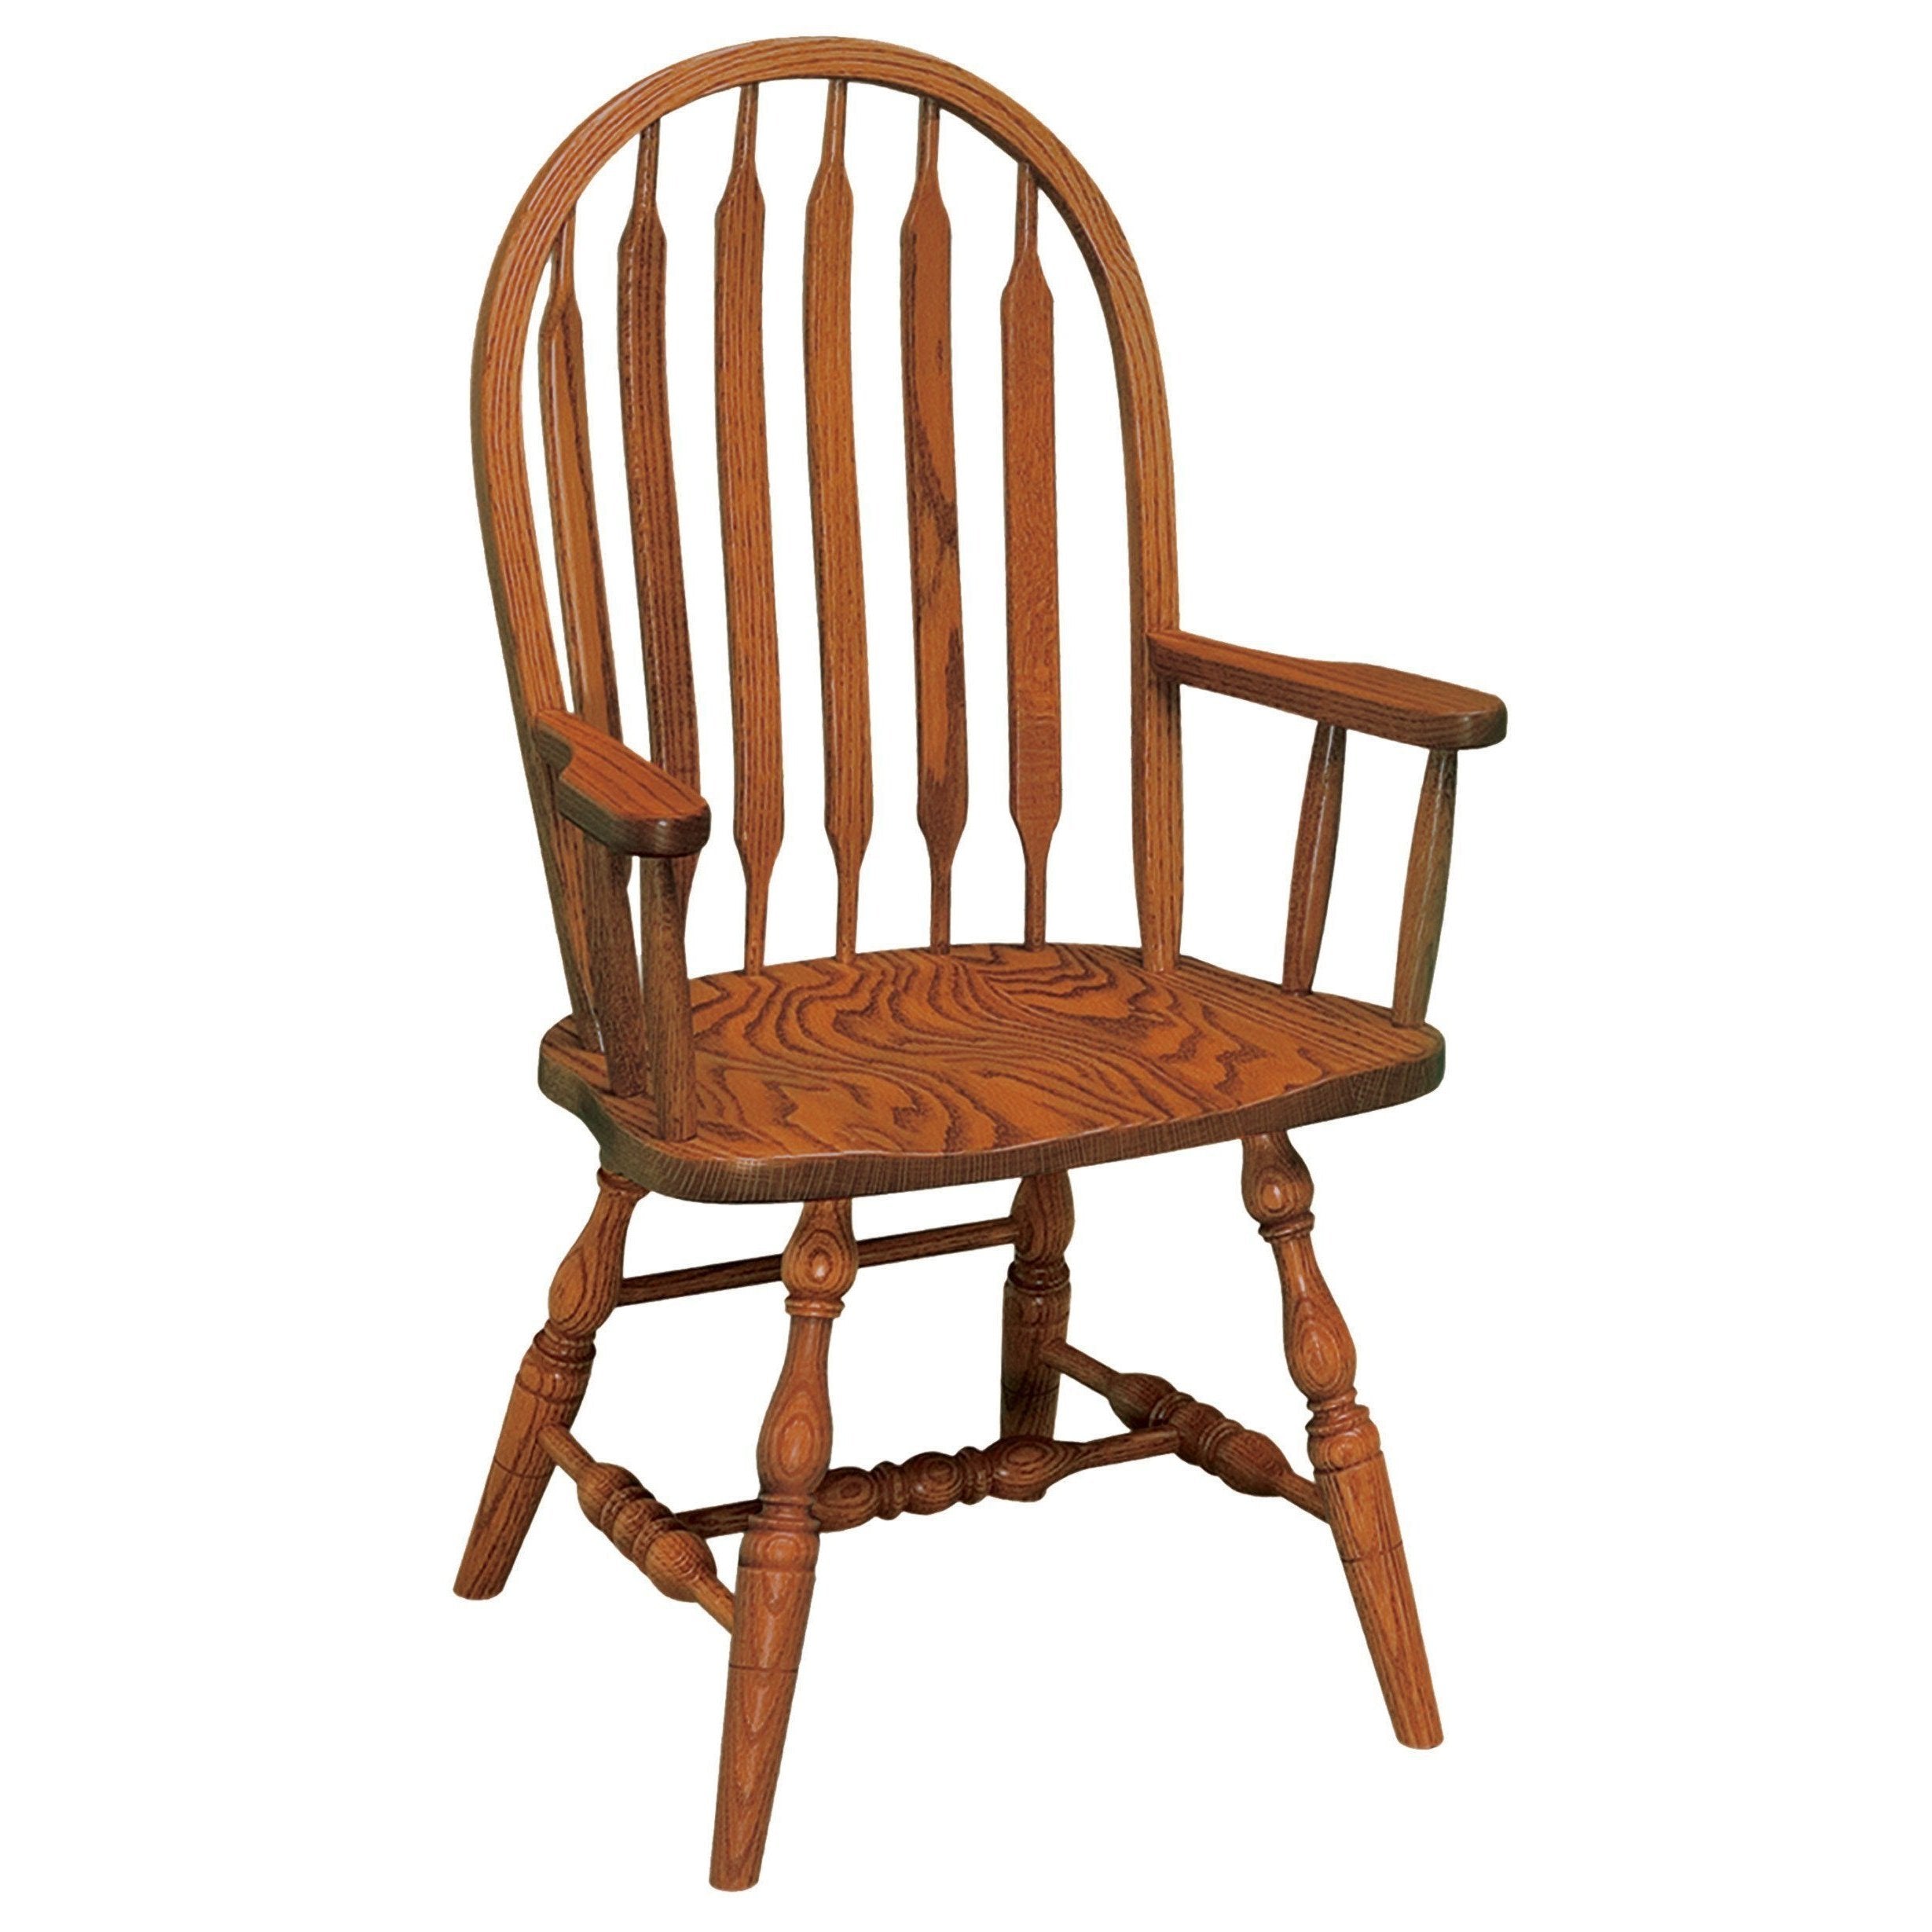 bent-paddle-side-chair-260048.jpg